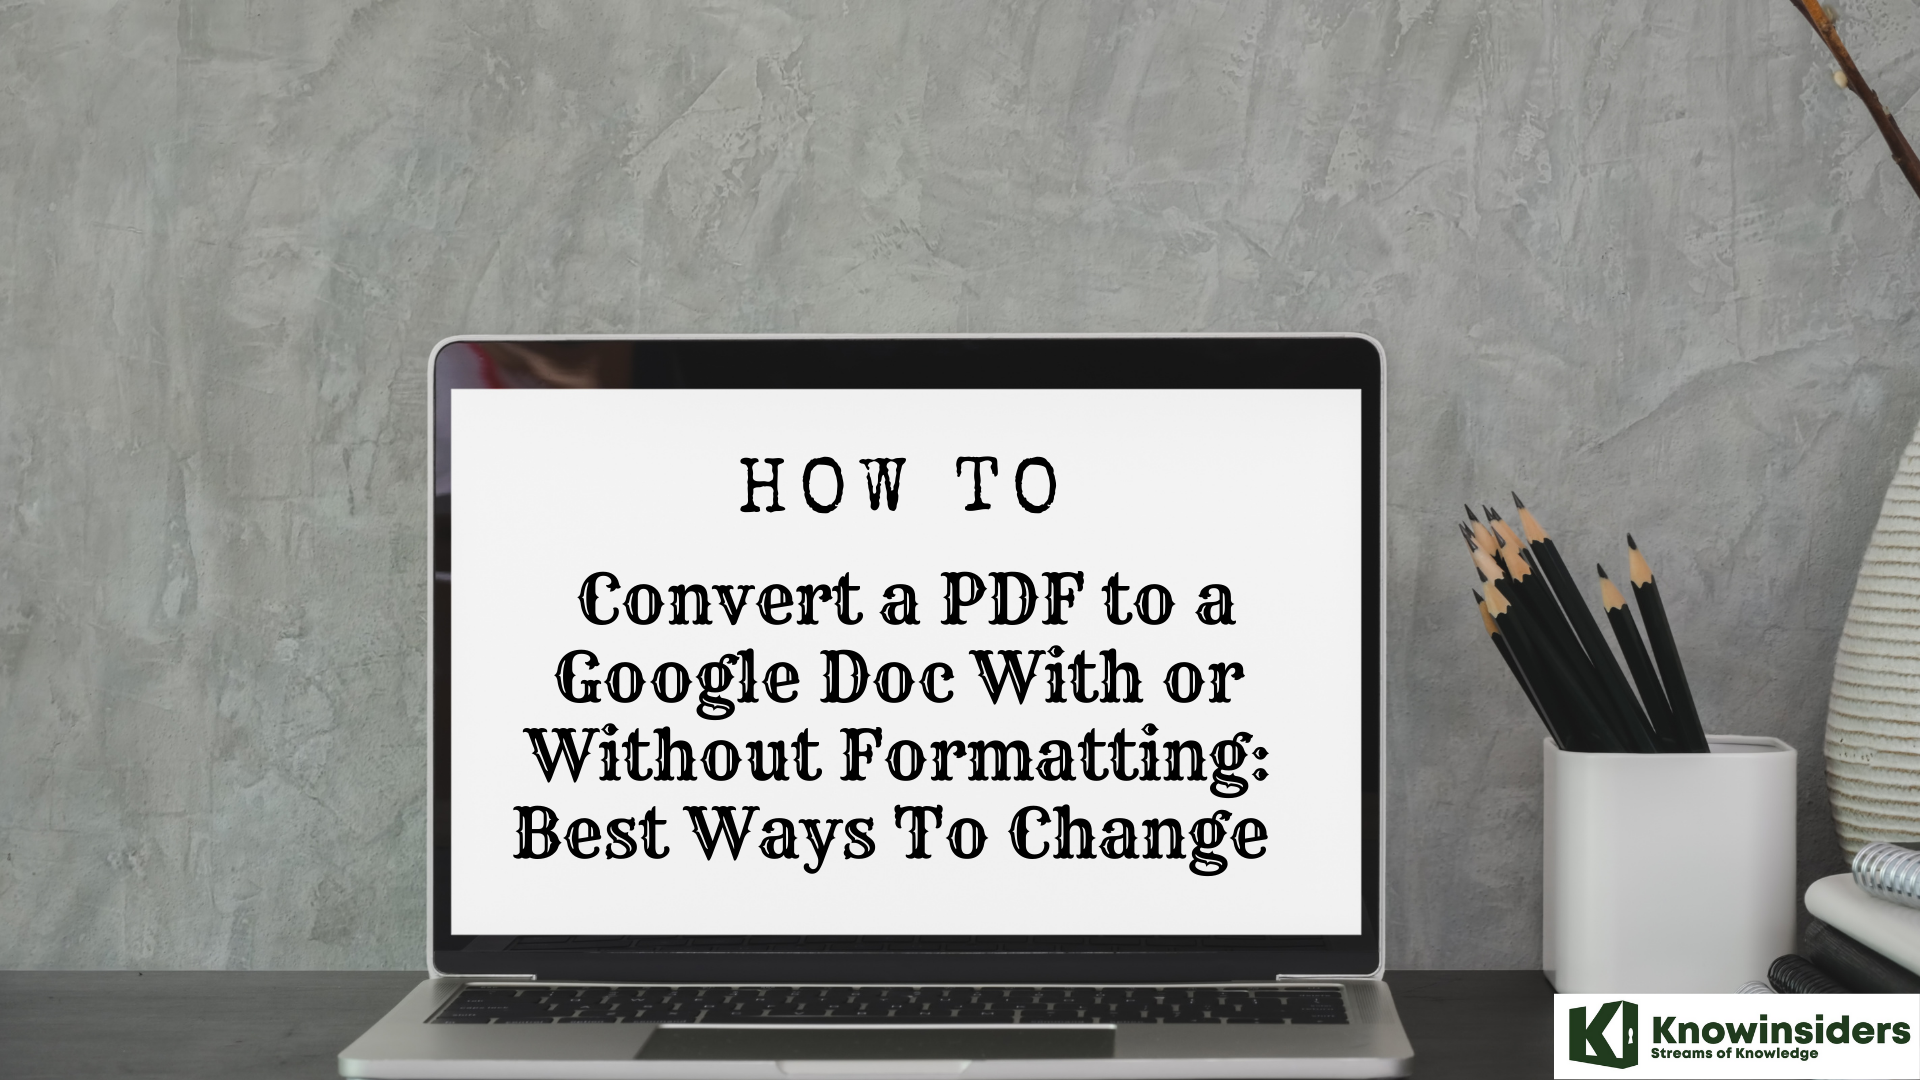 How To Convert a PDF to a Google Doc With or Without Formatting: Best Ways To Change 